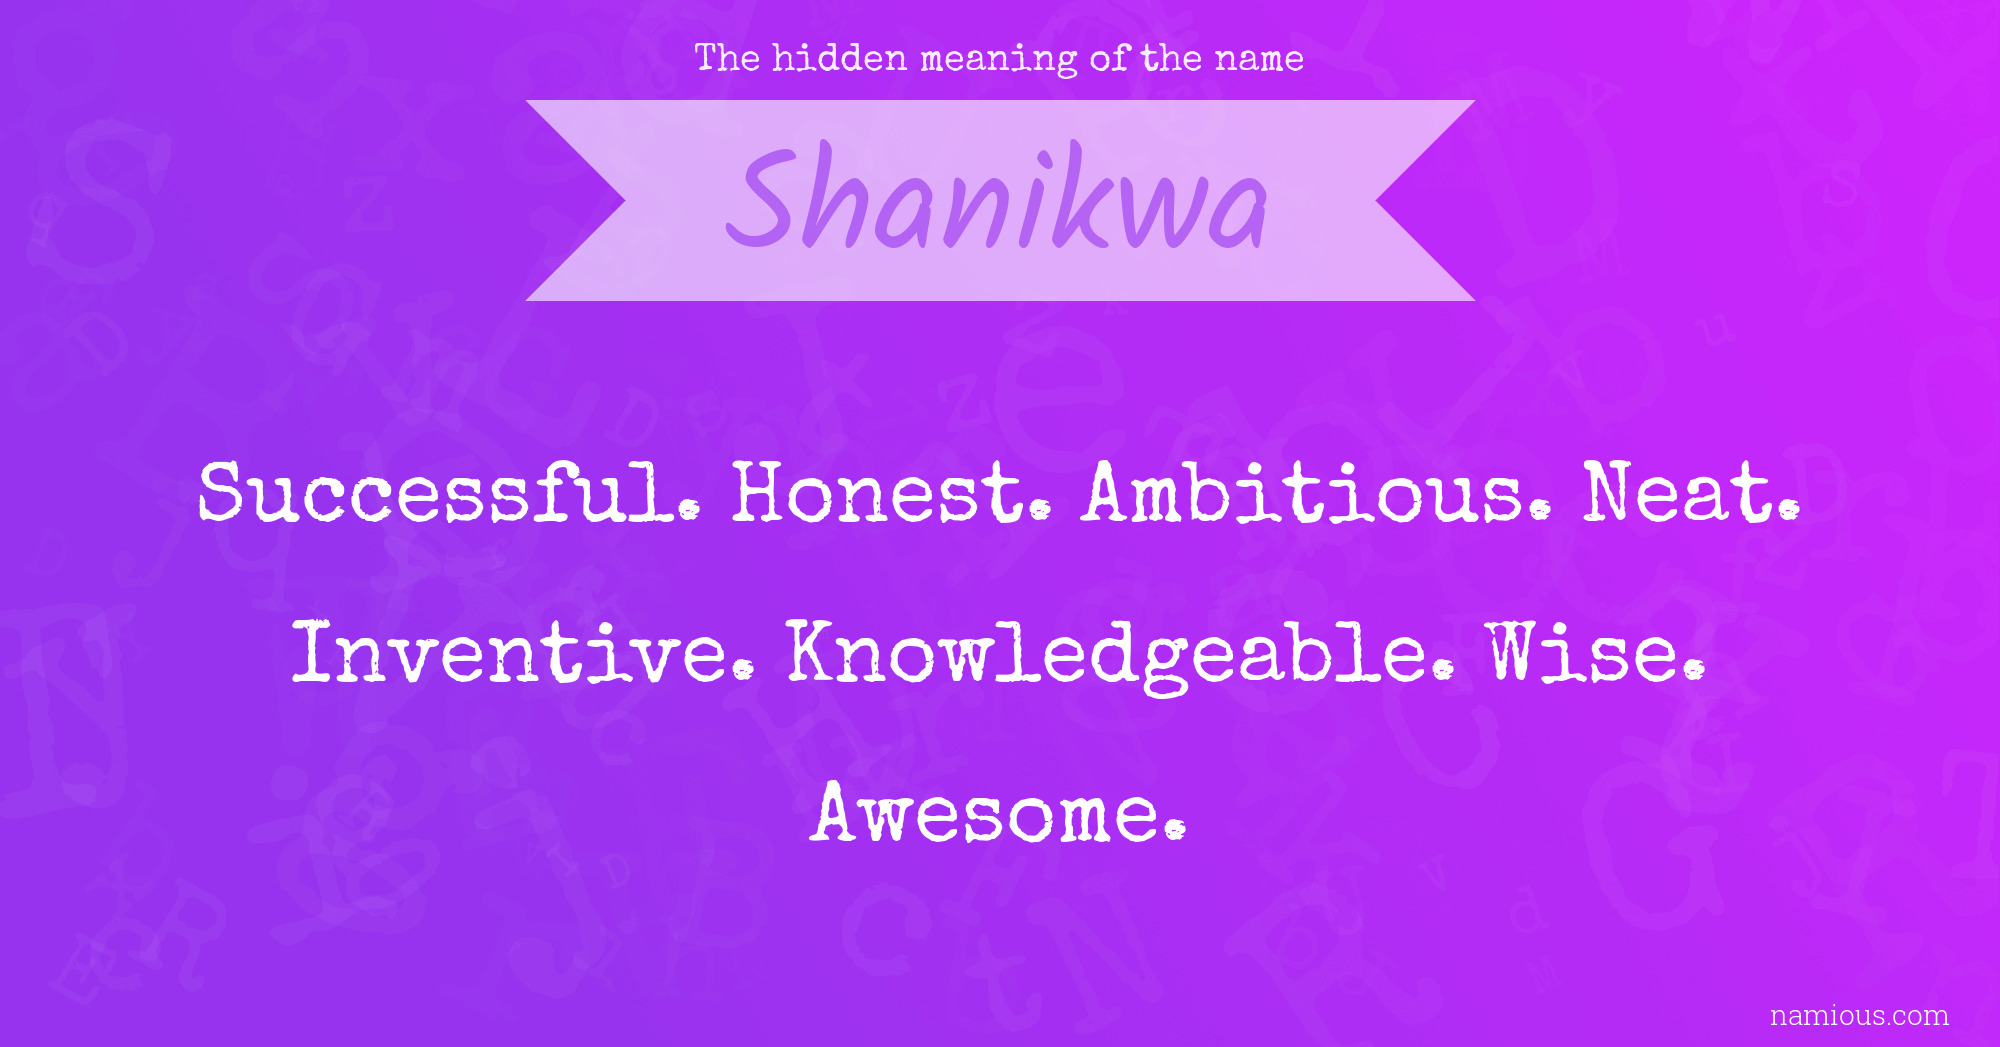 The hidden meaning of the name Shanikwa